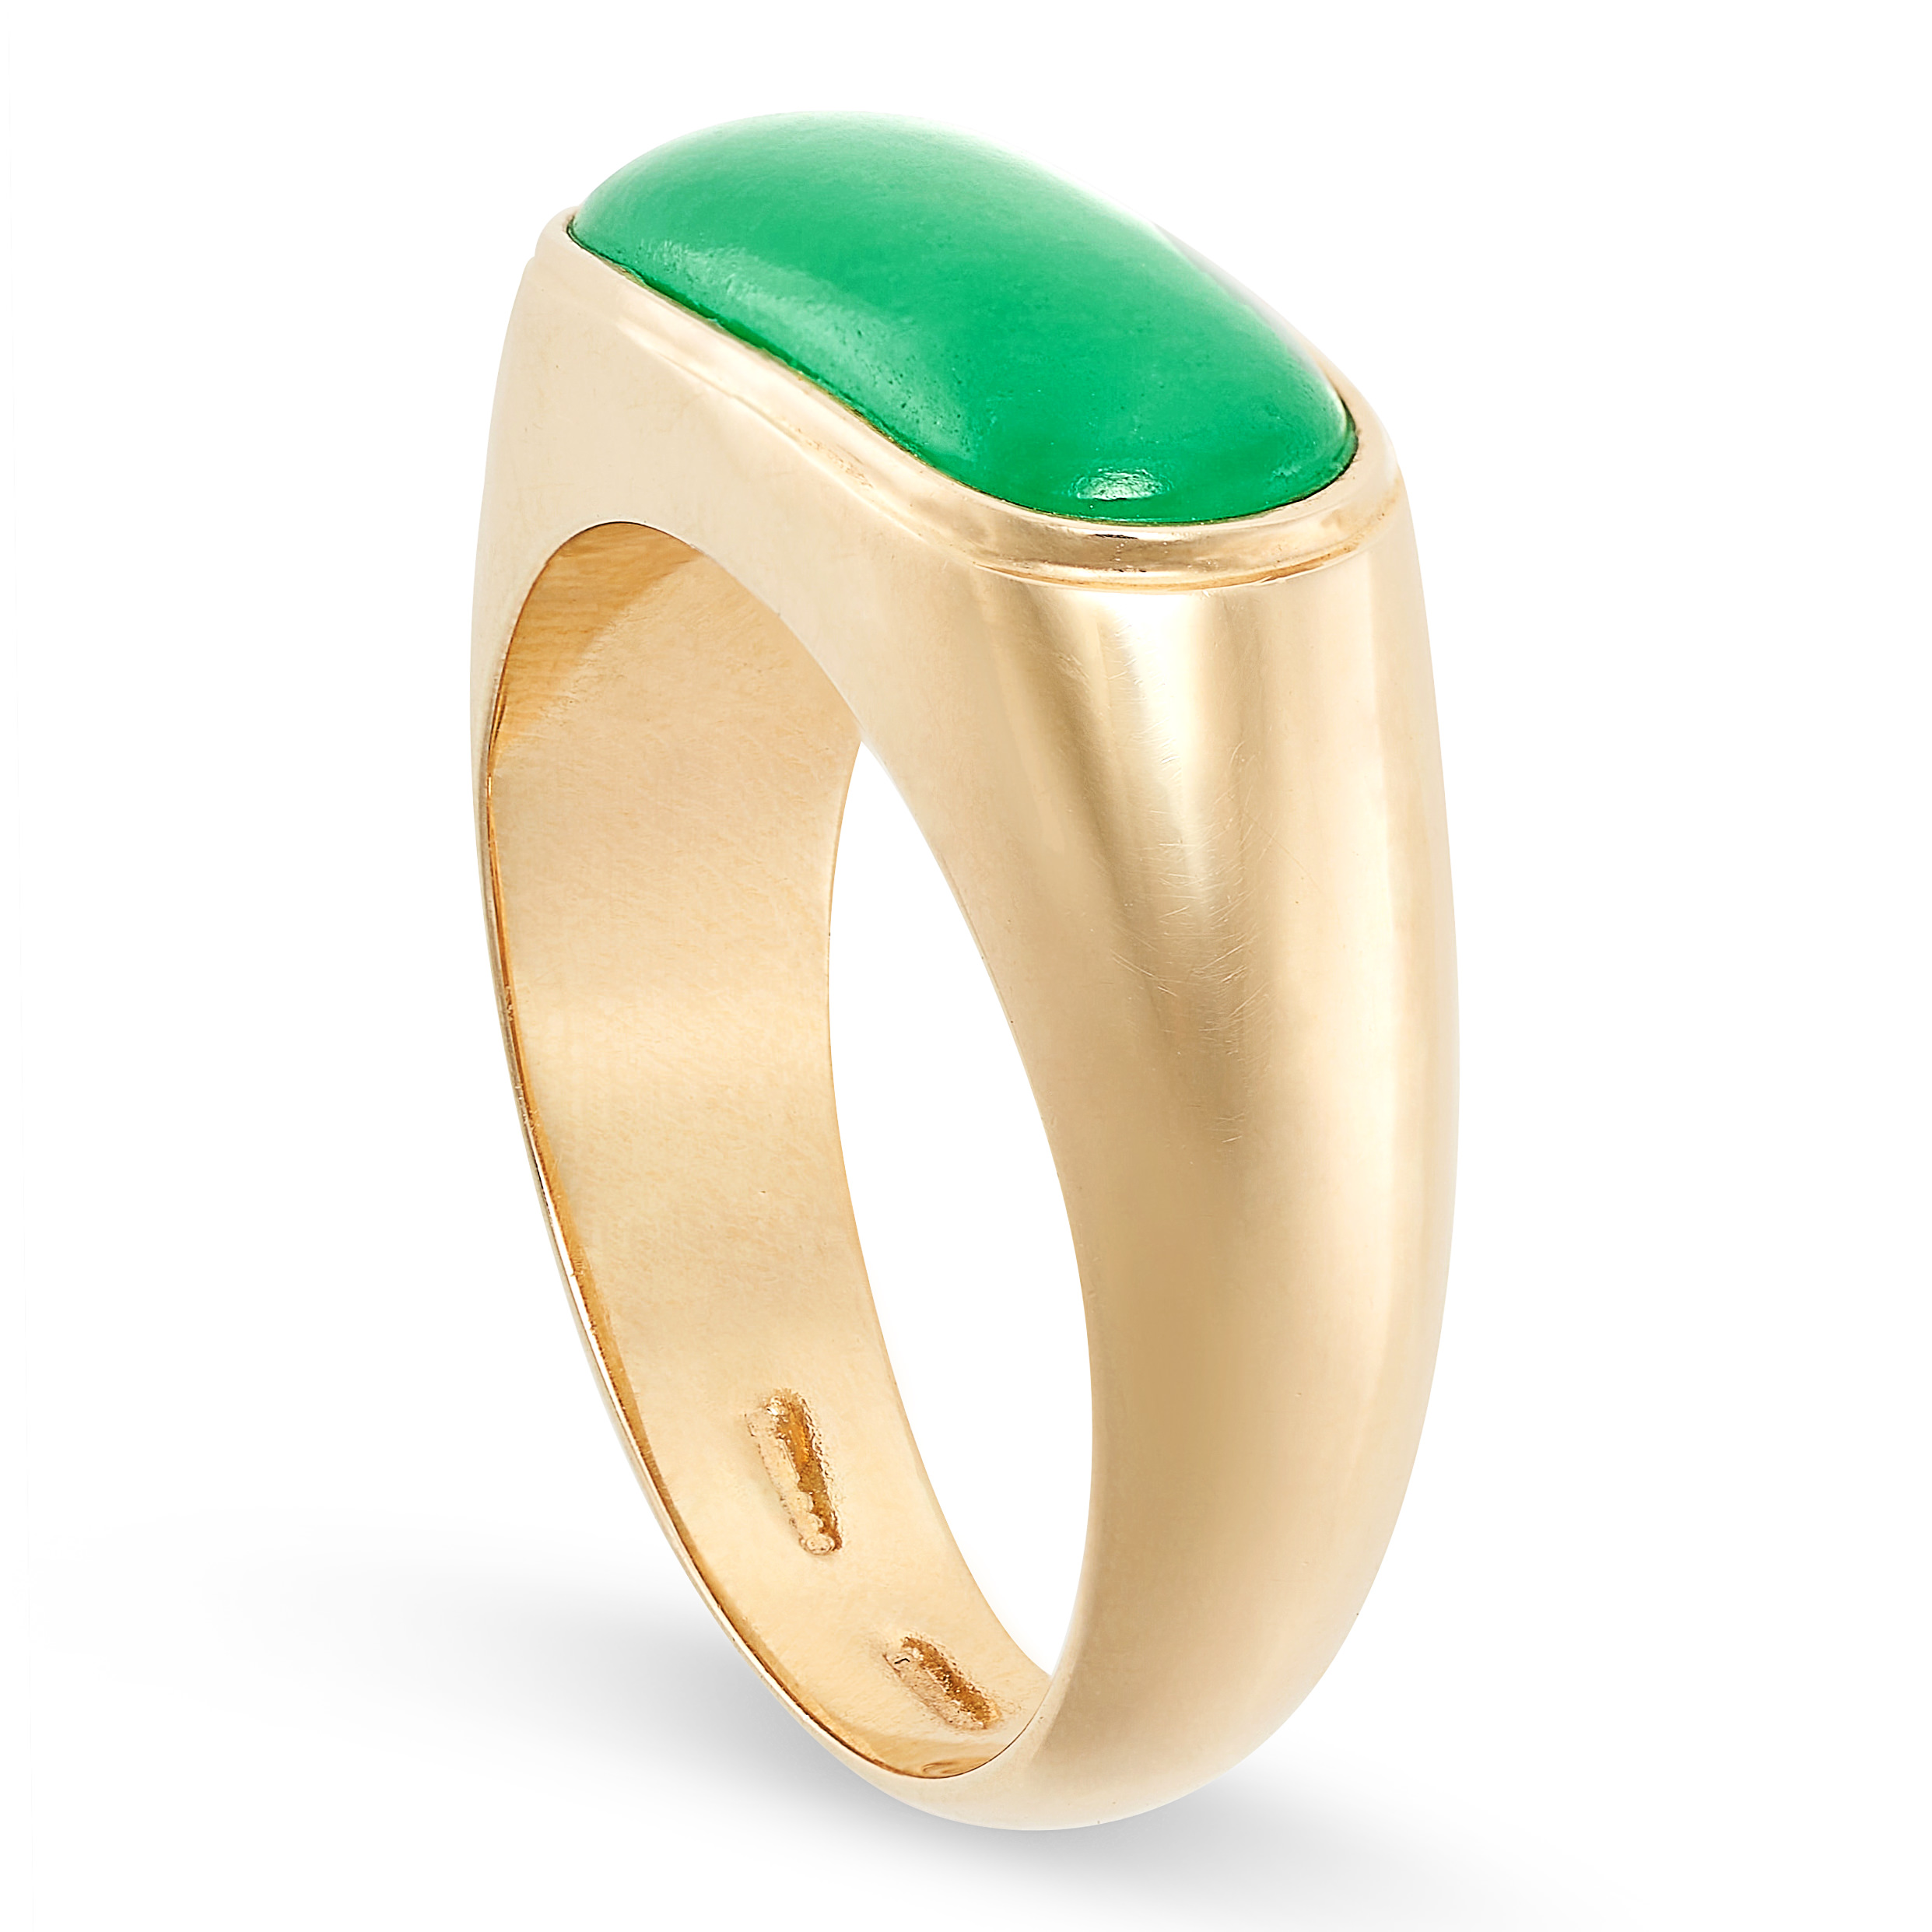 A JADEITE JADE RING in 14ct yellow gold, set with piece of polished jadeite jade, full British - Image 2 of 2